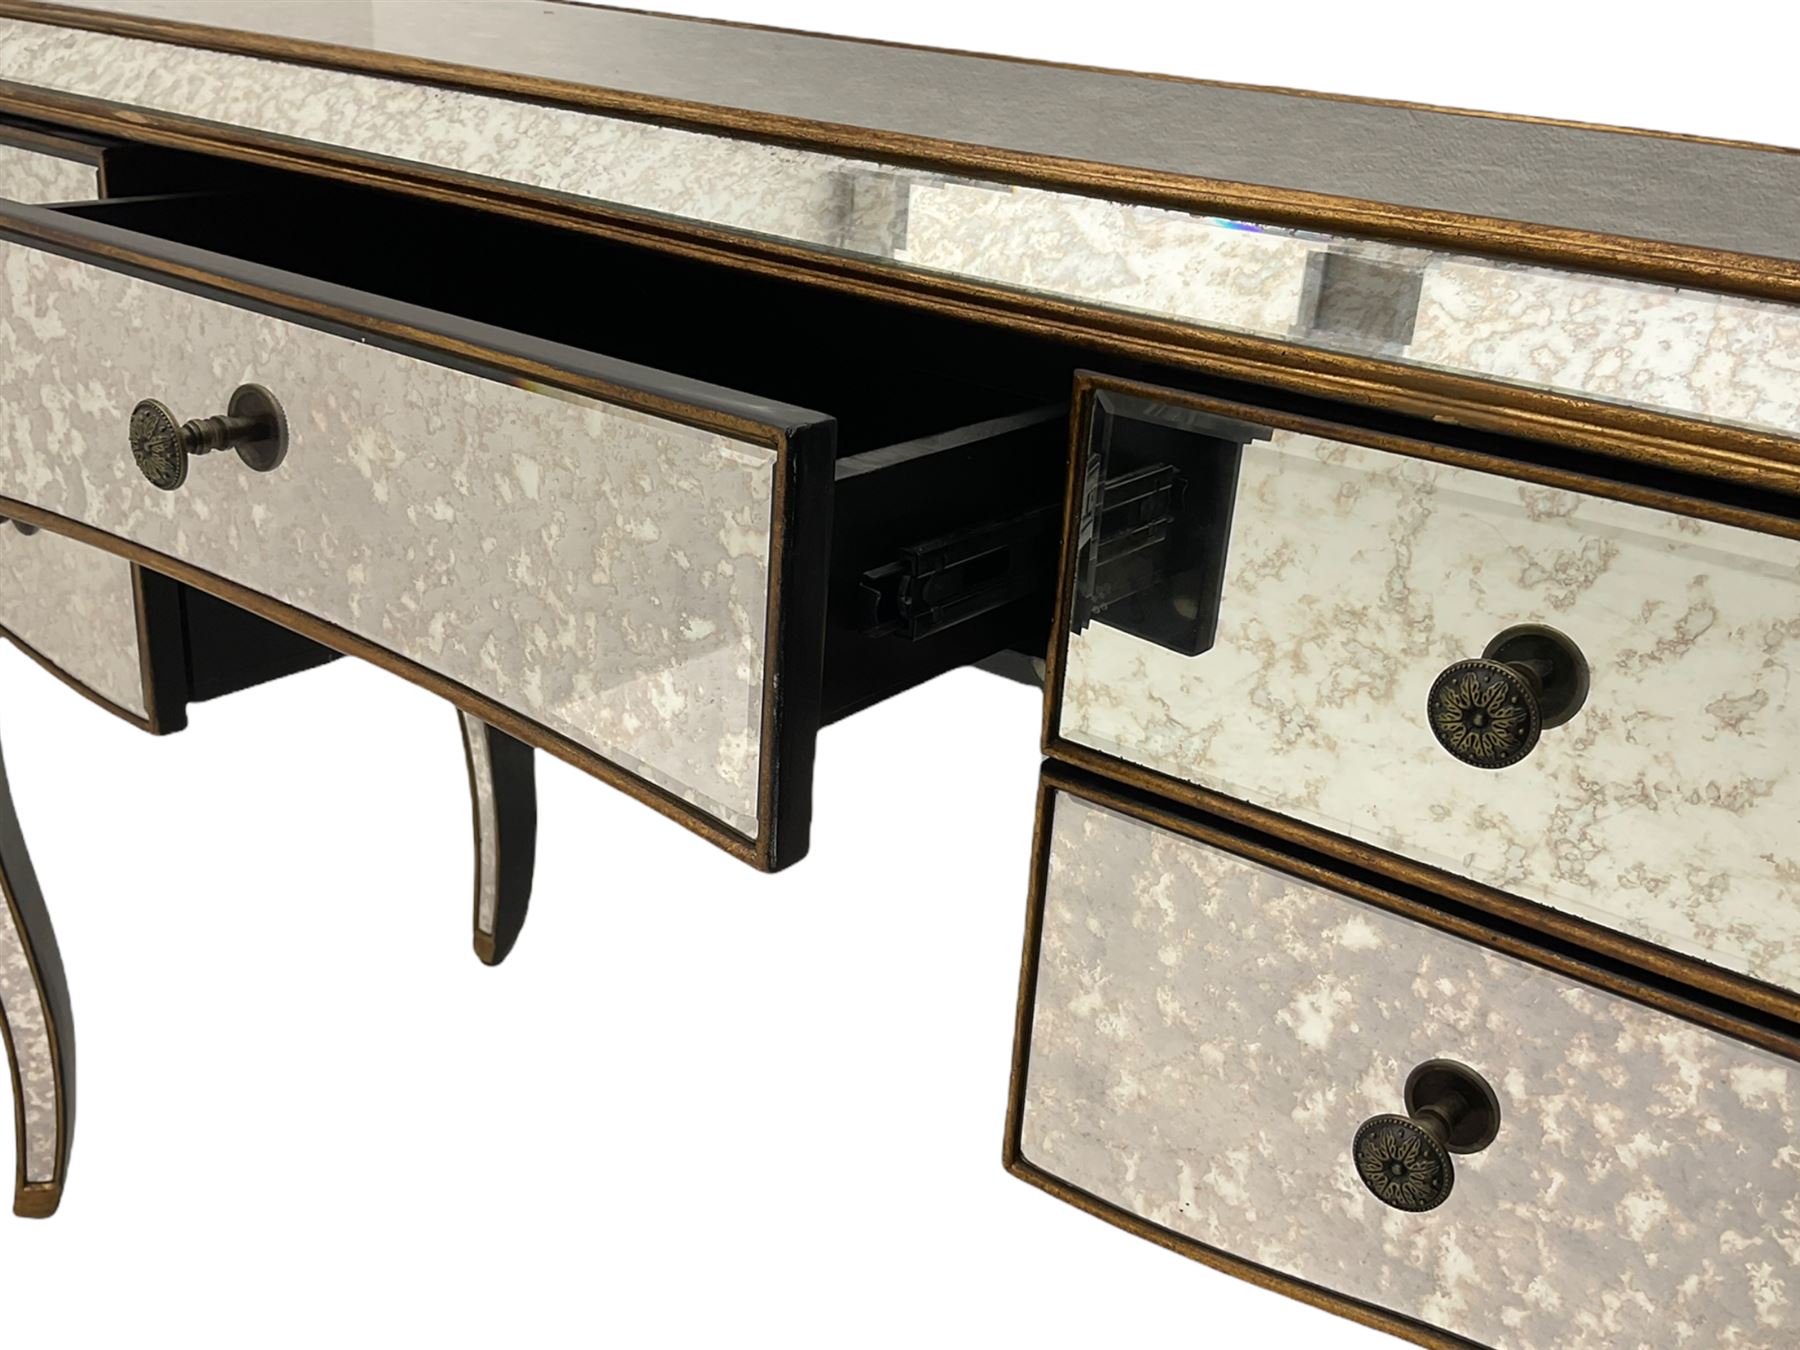 Contemporary mirrored dressing table - Image 7 of 8